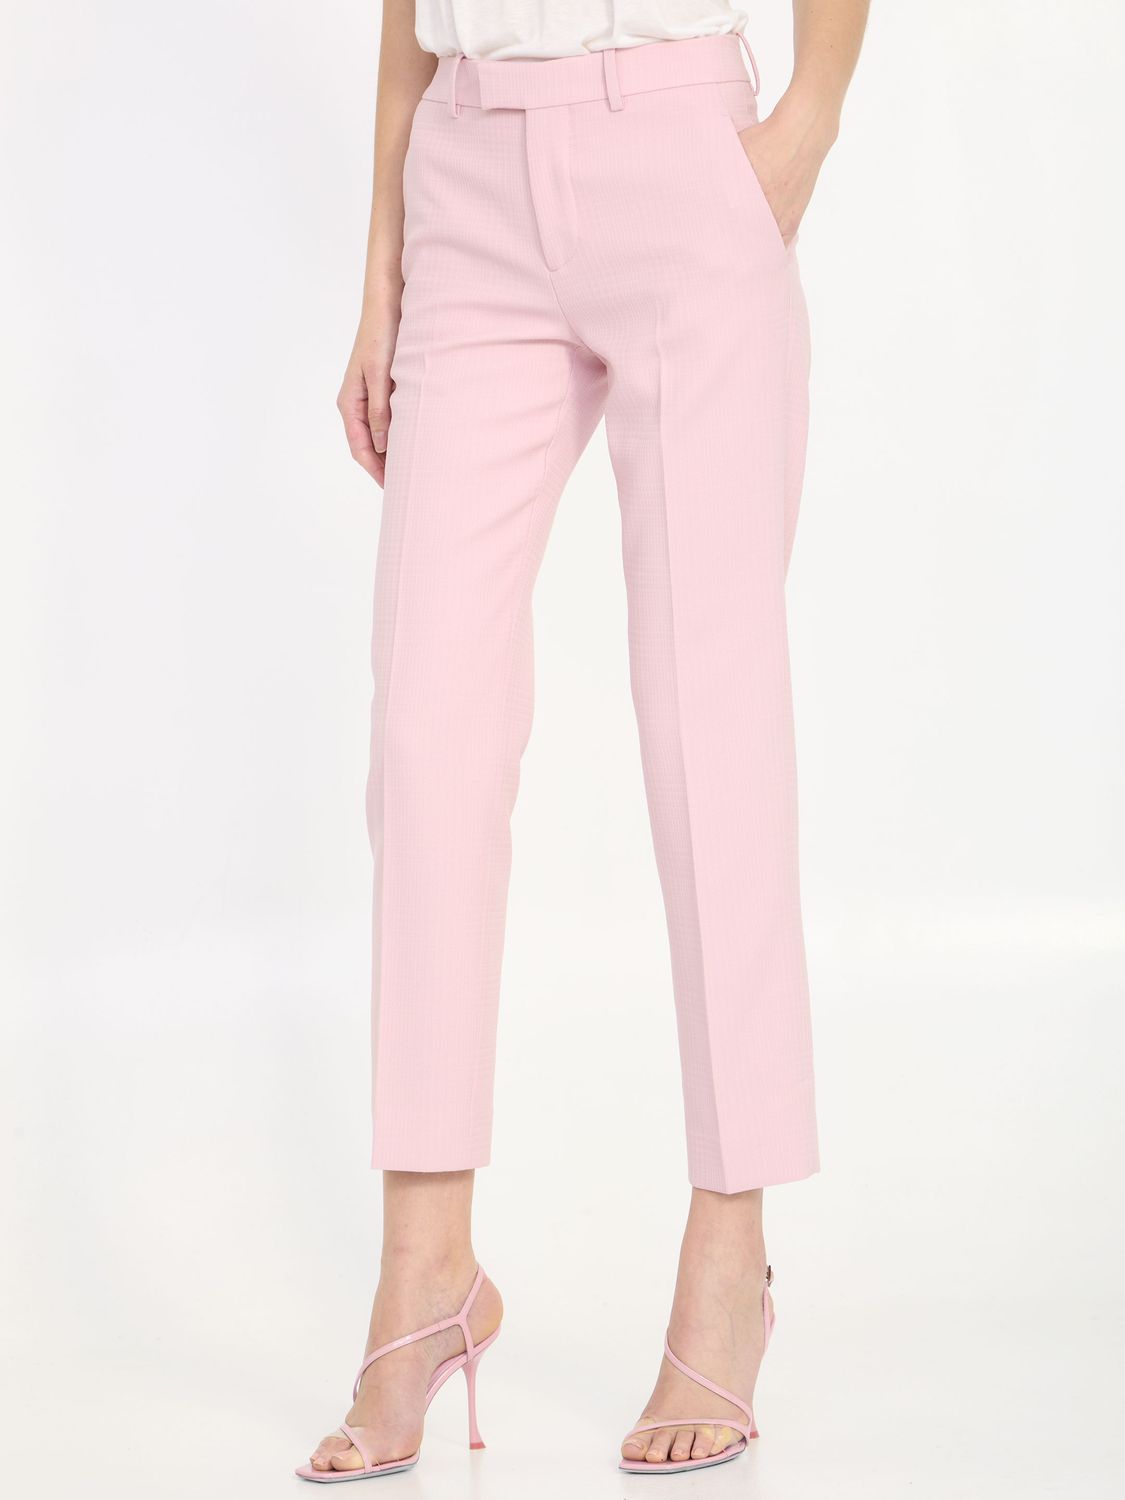 Tailored Trousers in Pink Wool - Regular Fit - UK Sizing